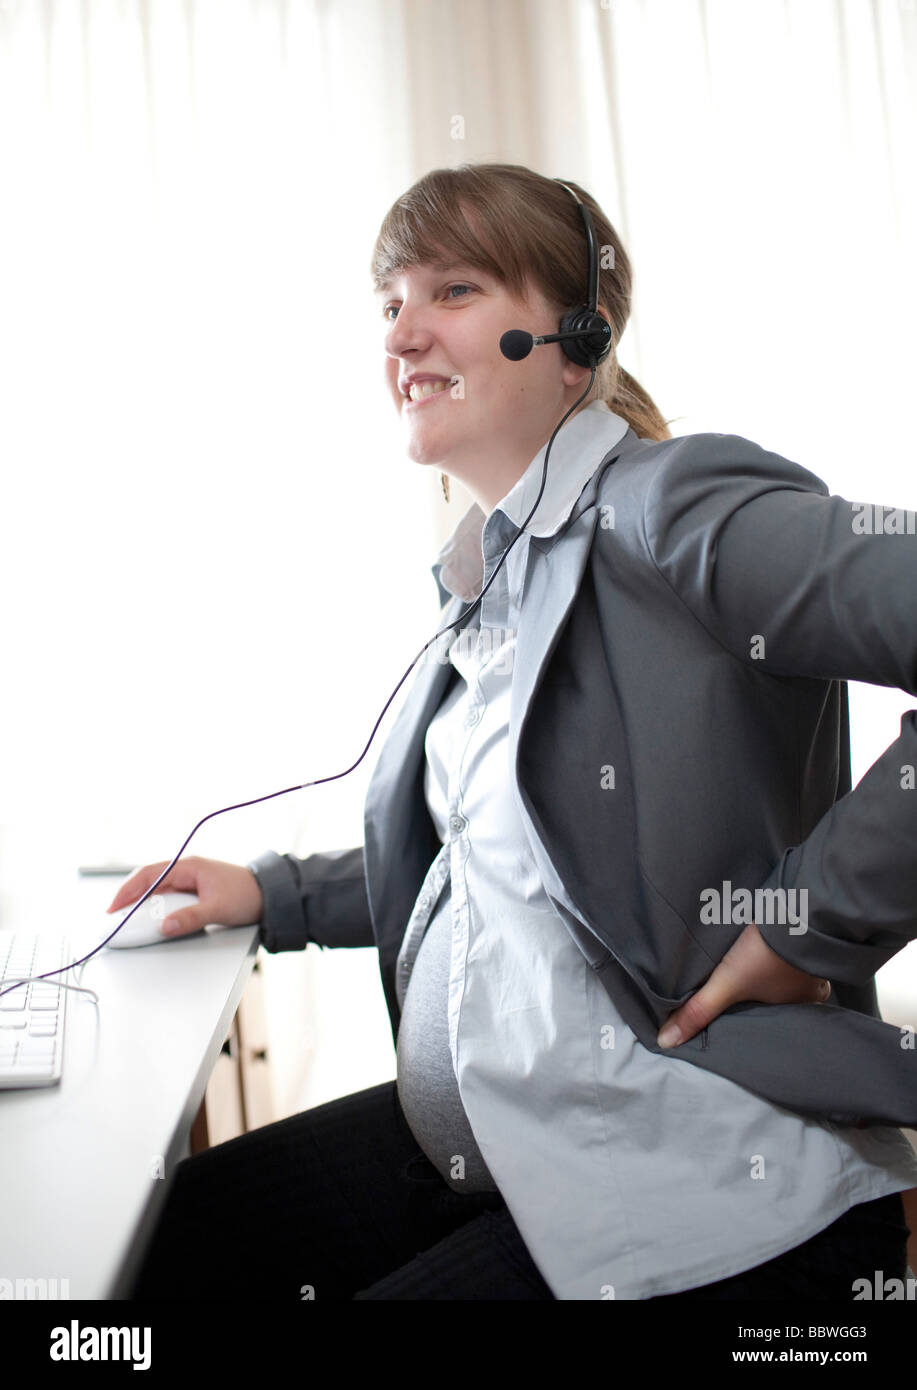 Pregnant woman working at a computer Stock Photo